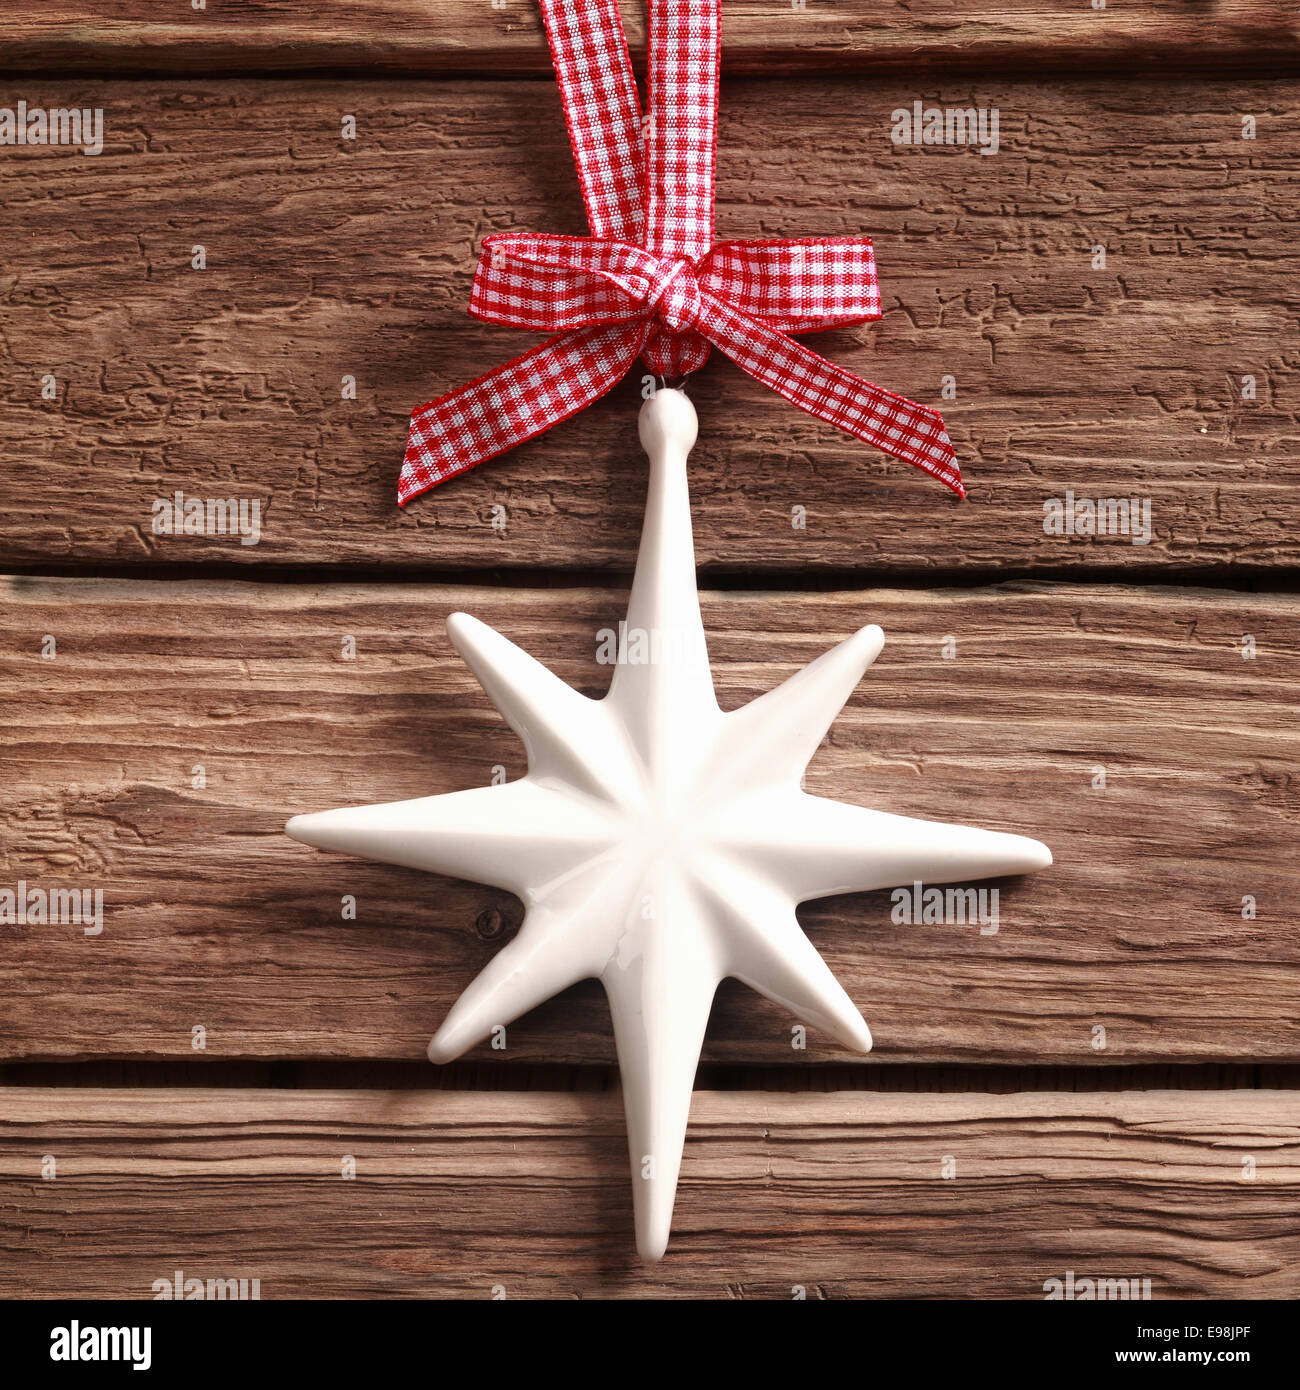 White Christmas star ornament hanging from a pretty red and white checked ribbon and bow on rustic textured wood in square format Stock Photo